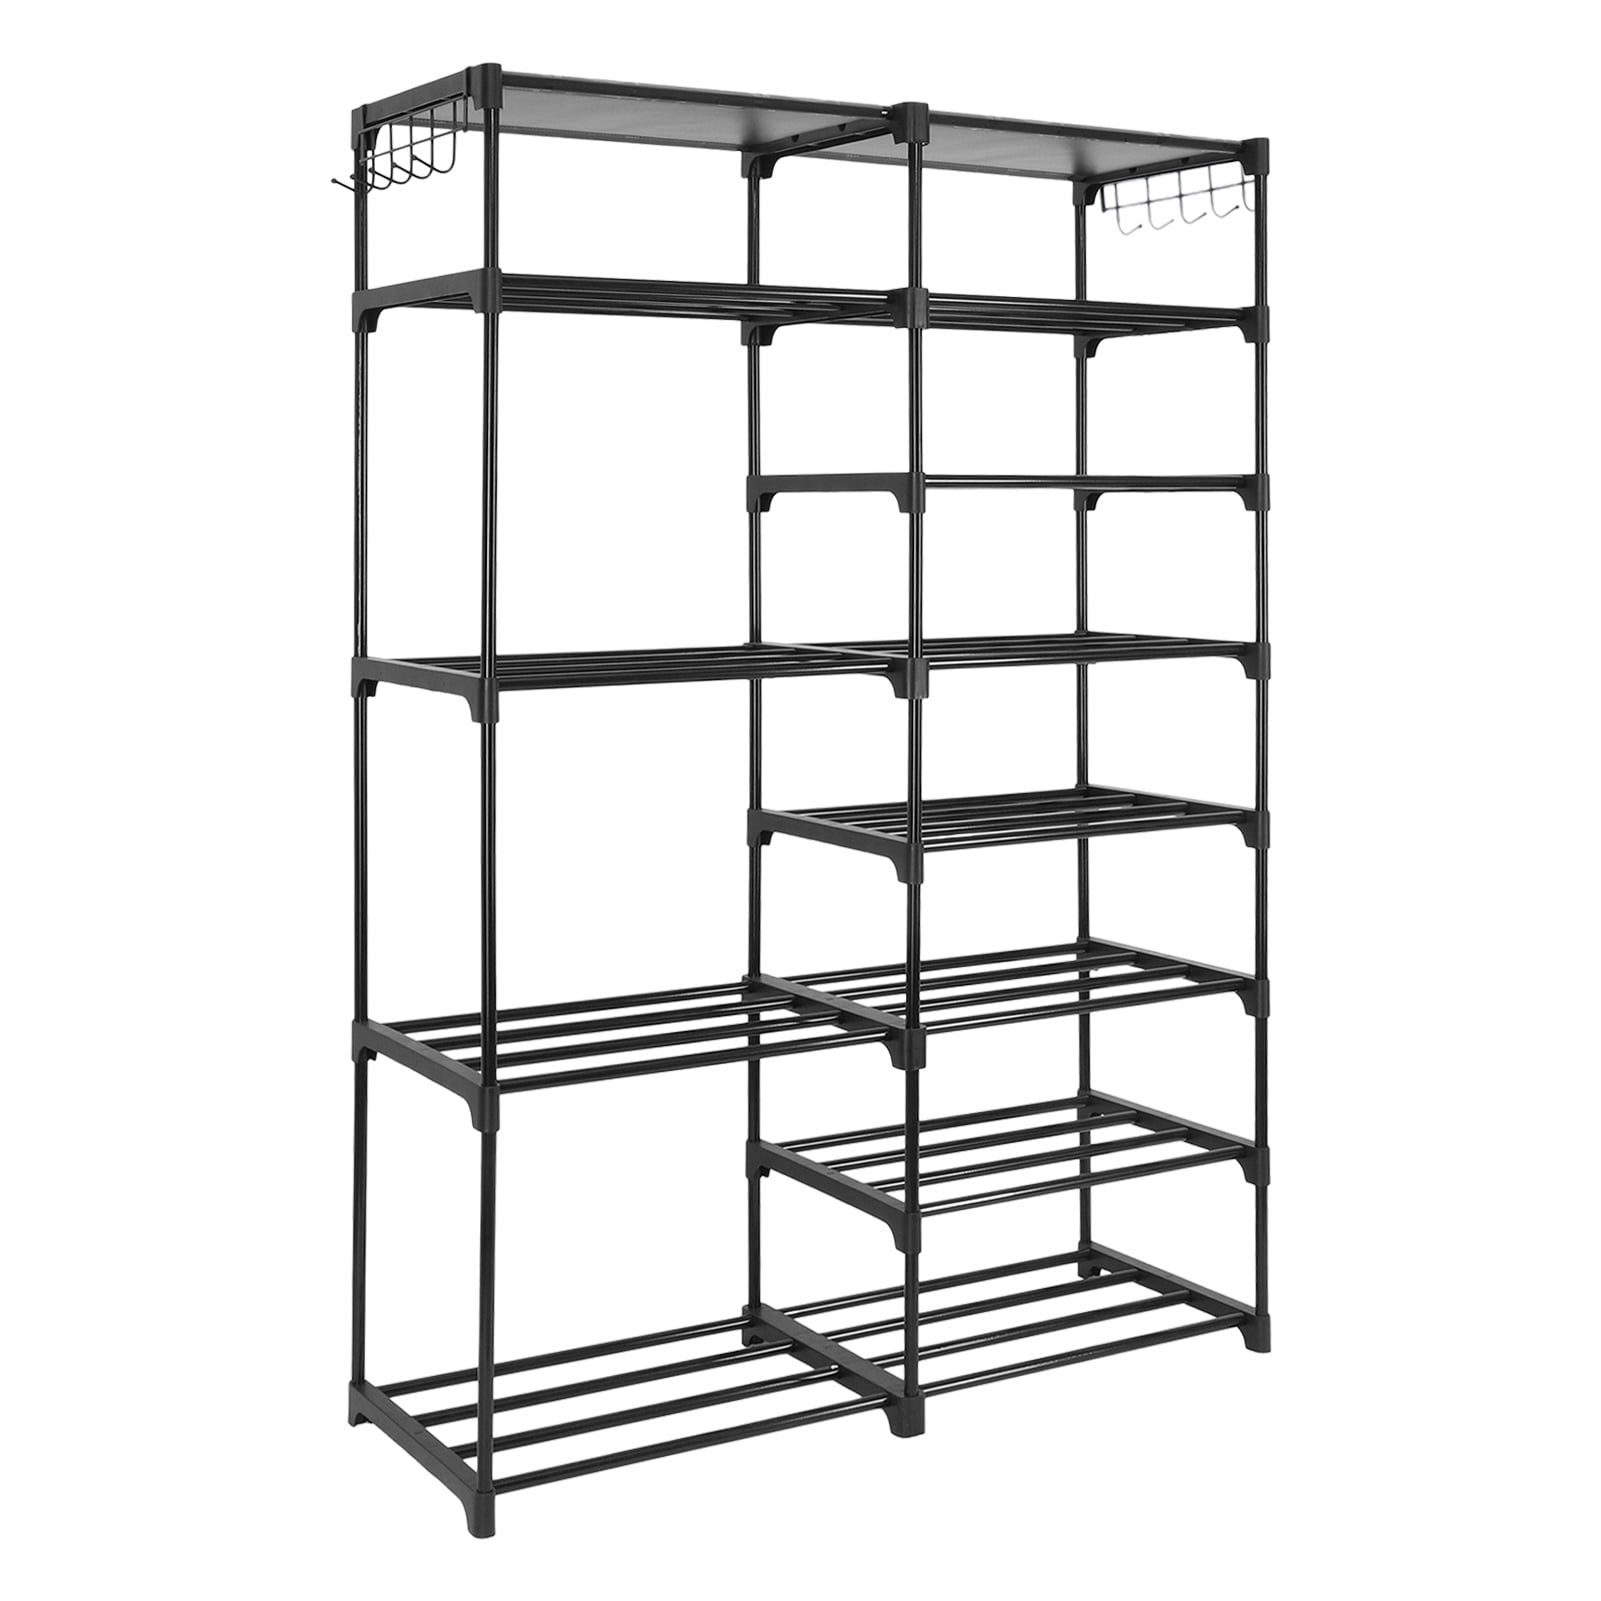 HEQUSIGNS 8 Tiers Metal Shoe Rack Organizer for Entryway, 40-50 Pairs ...